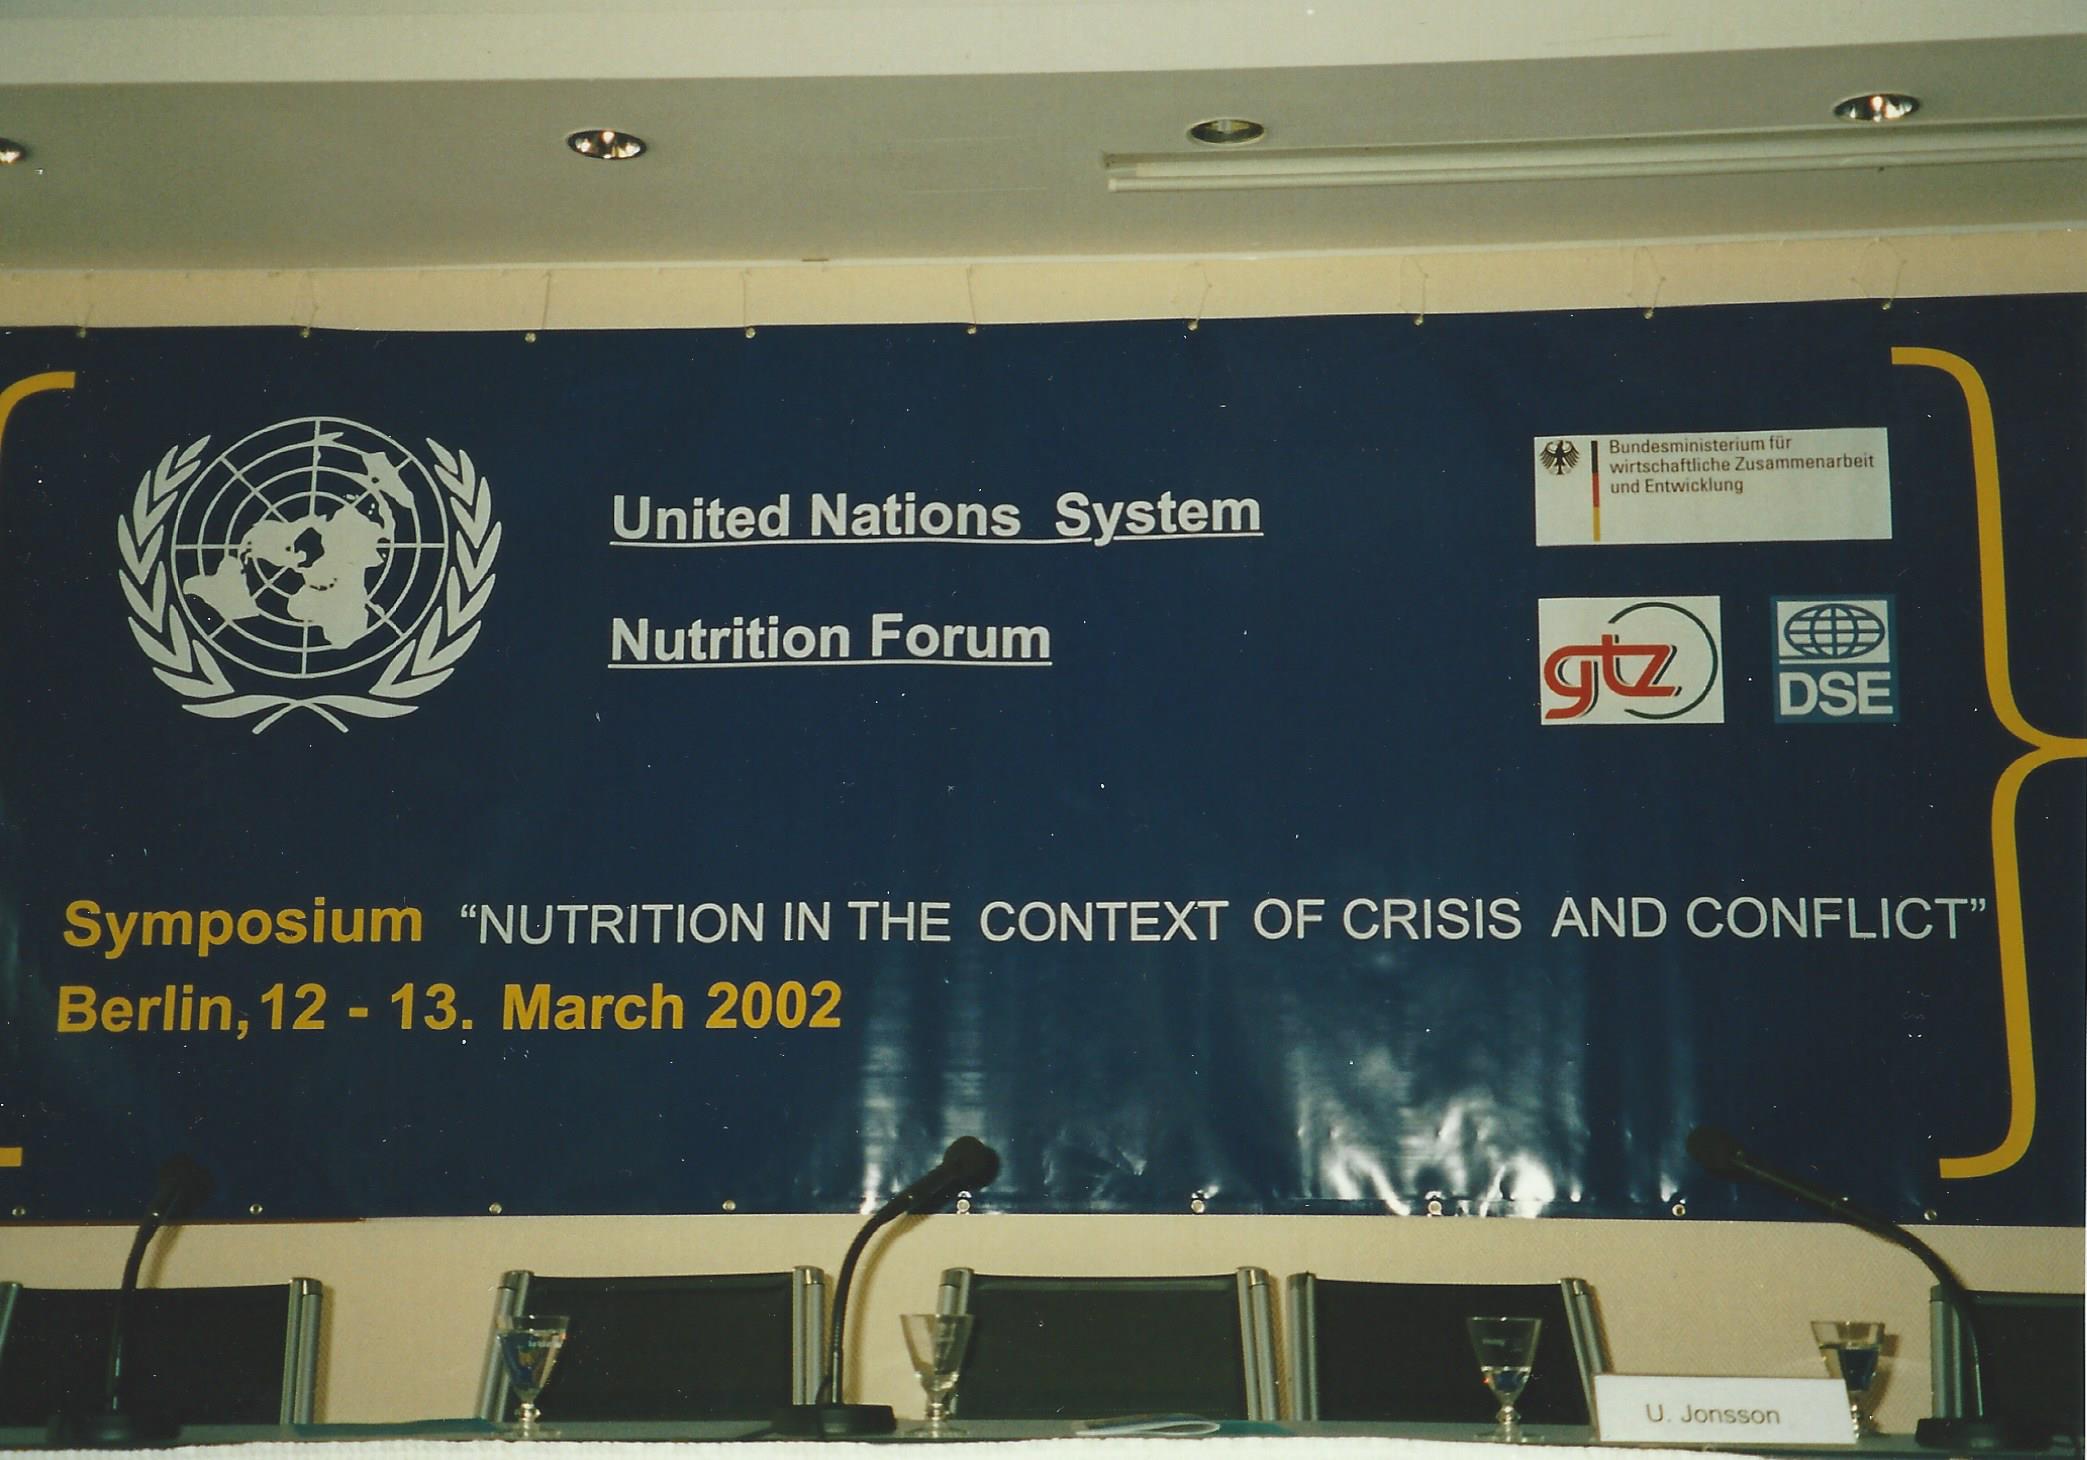  Catherine Bertini elected to Chair of the UN System Standing Committee on Nutrition (2002) 